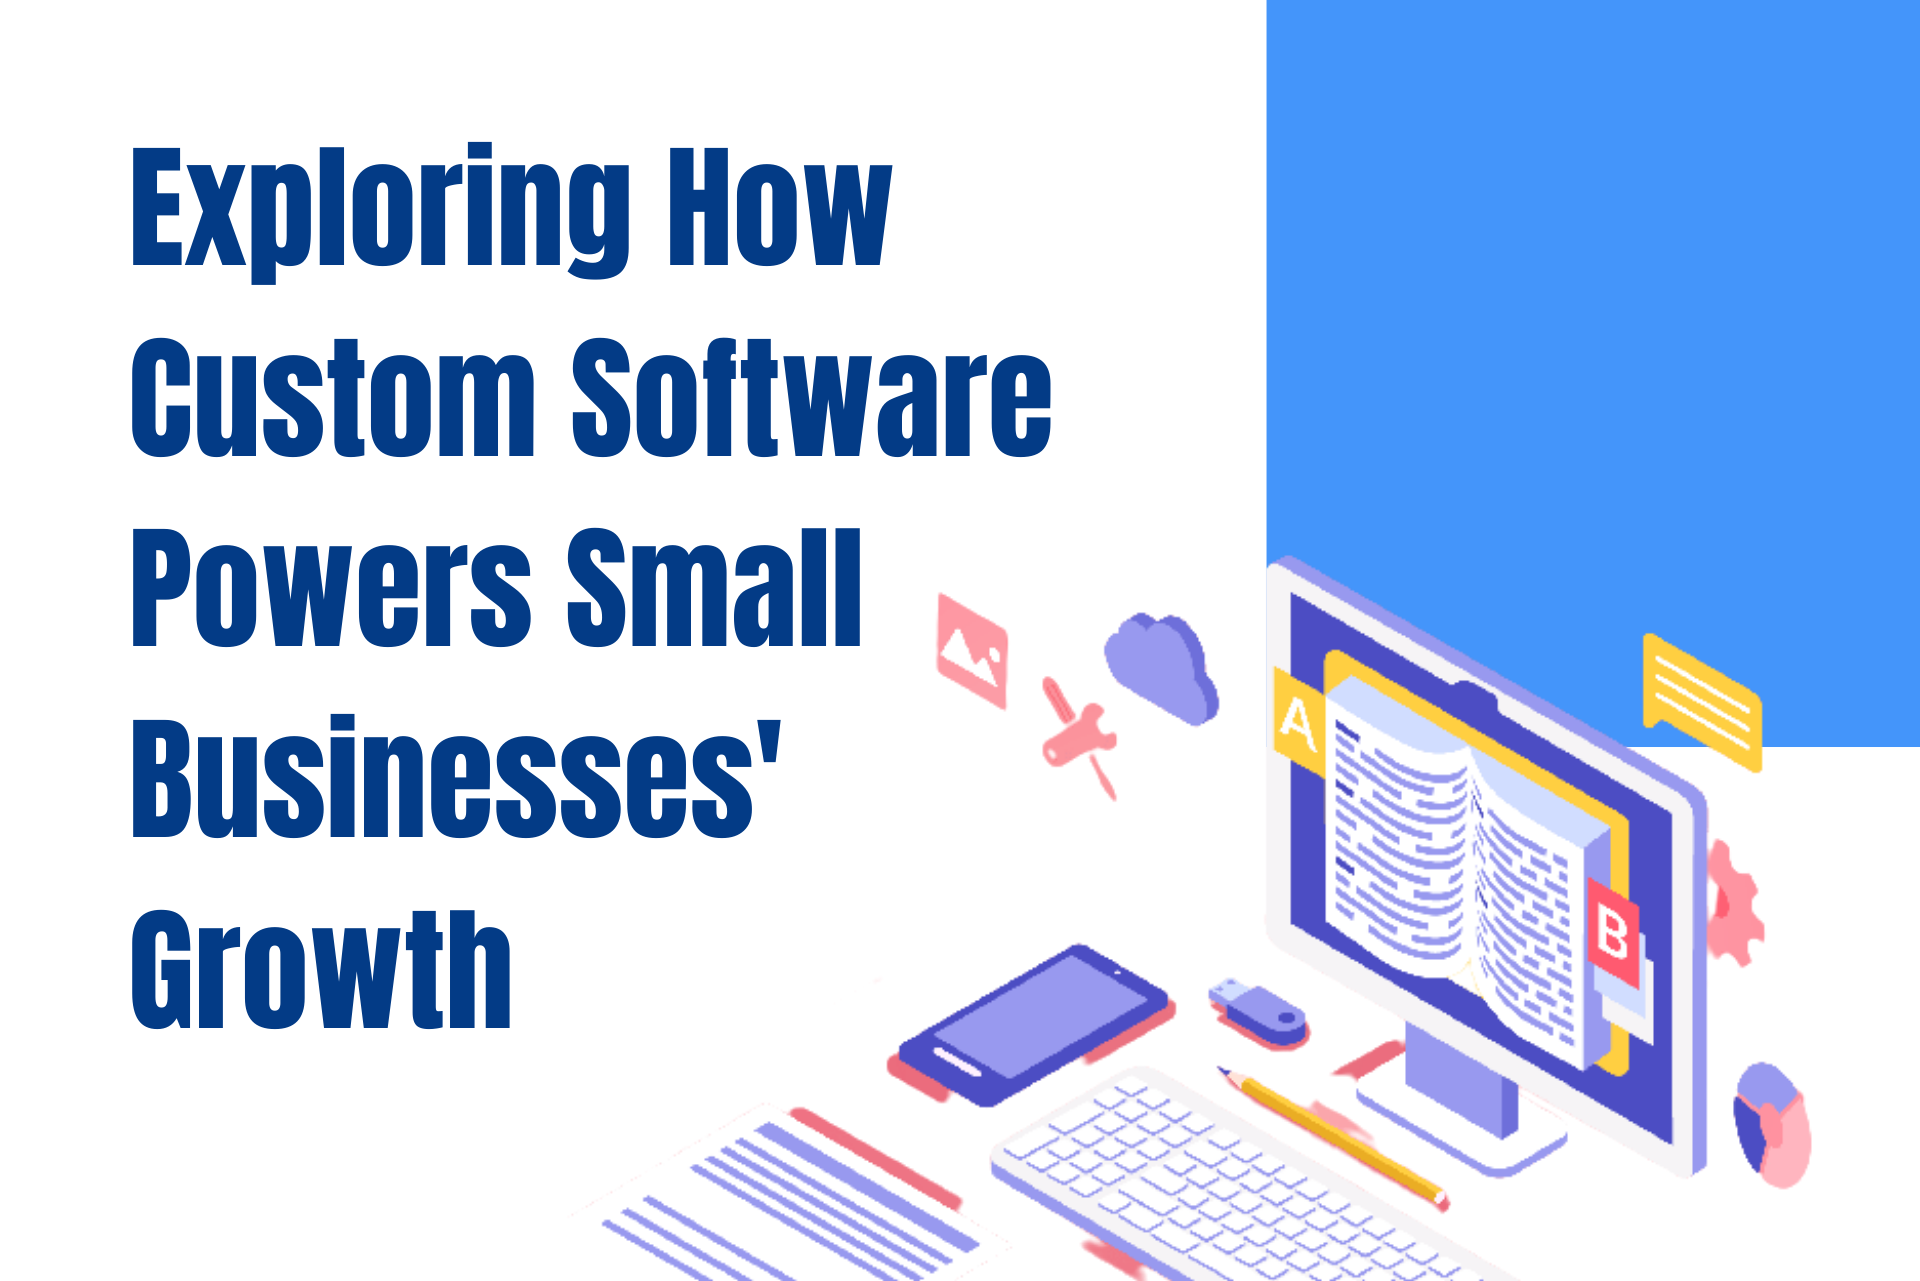 Exploring How Custom Software Powers Small Businesses’ Growth